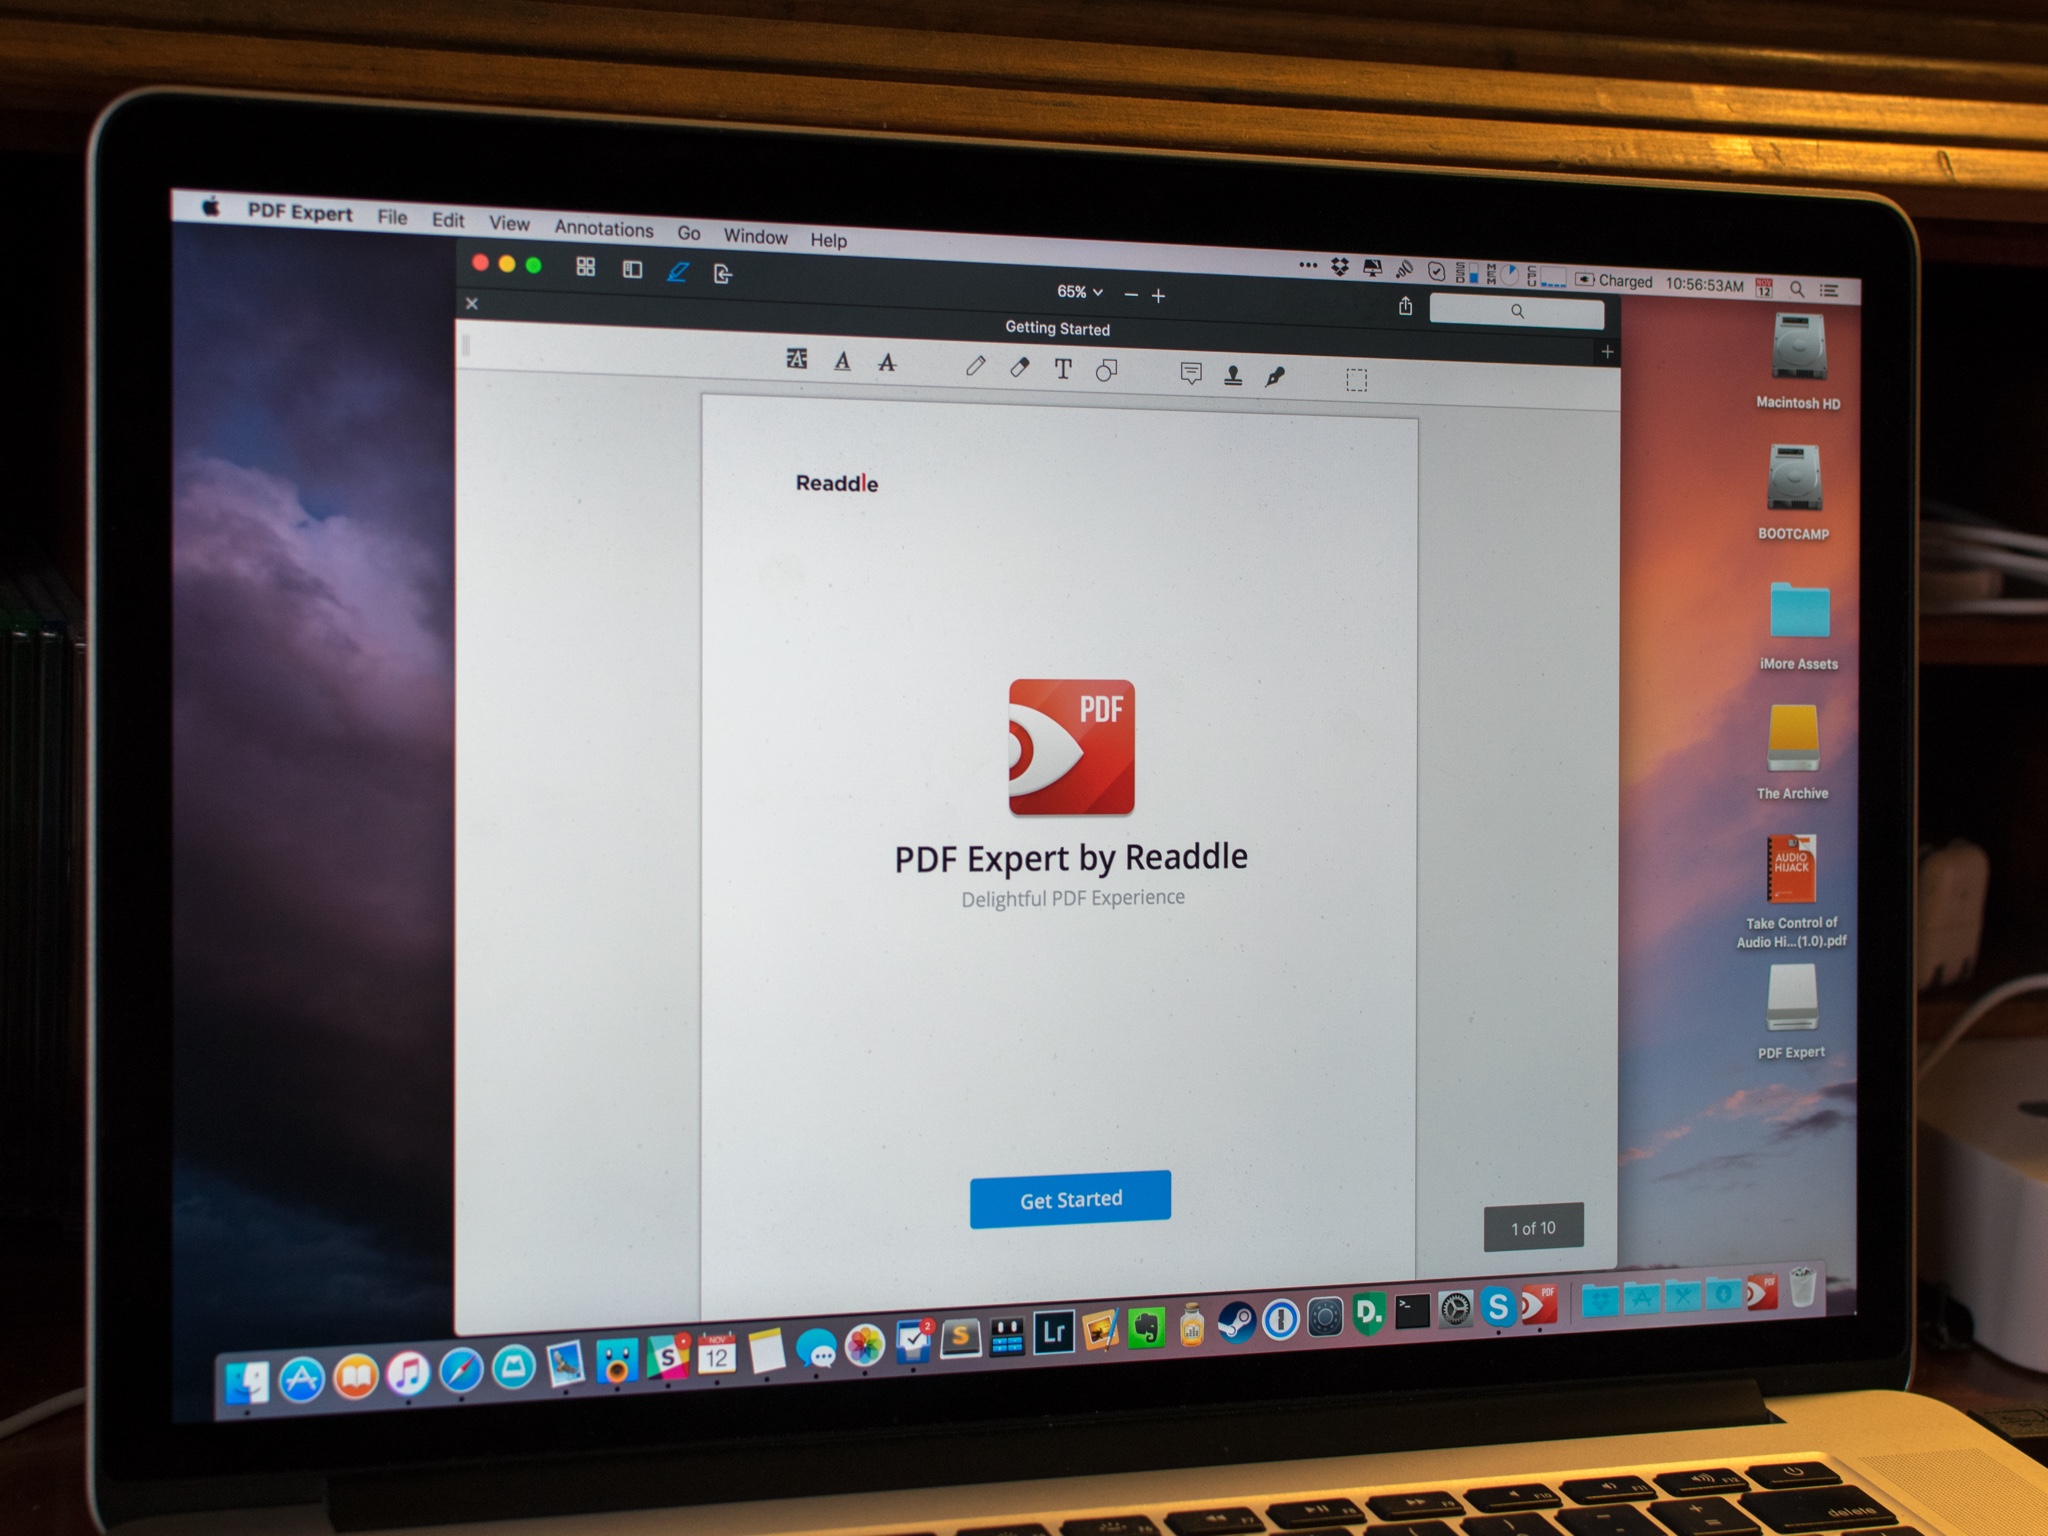 Readdle brings PDF Expert to the Mac for easy and powerful